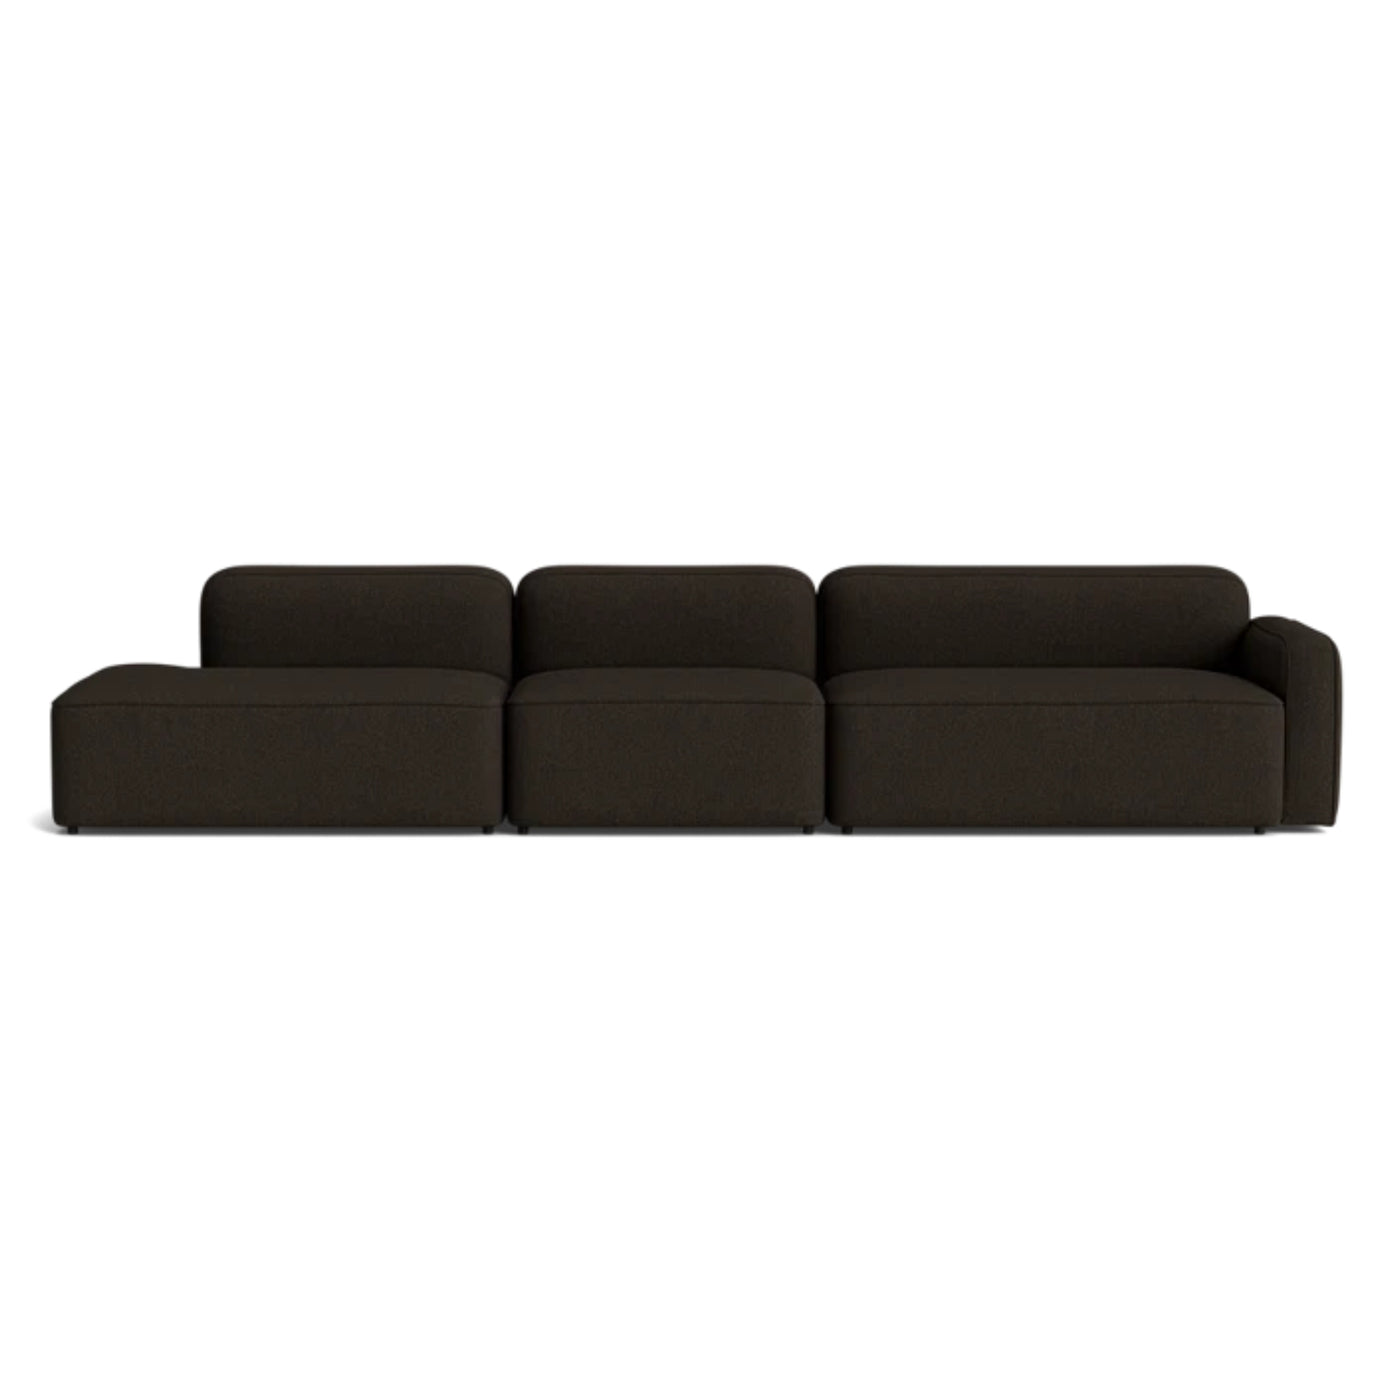 Normann Copenhagen Rope 3 Seater Modular Sofa. Made to order at someday designs. #colour_hallingdal-376